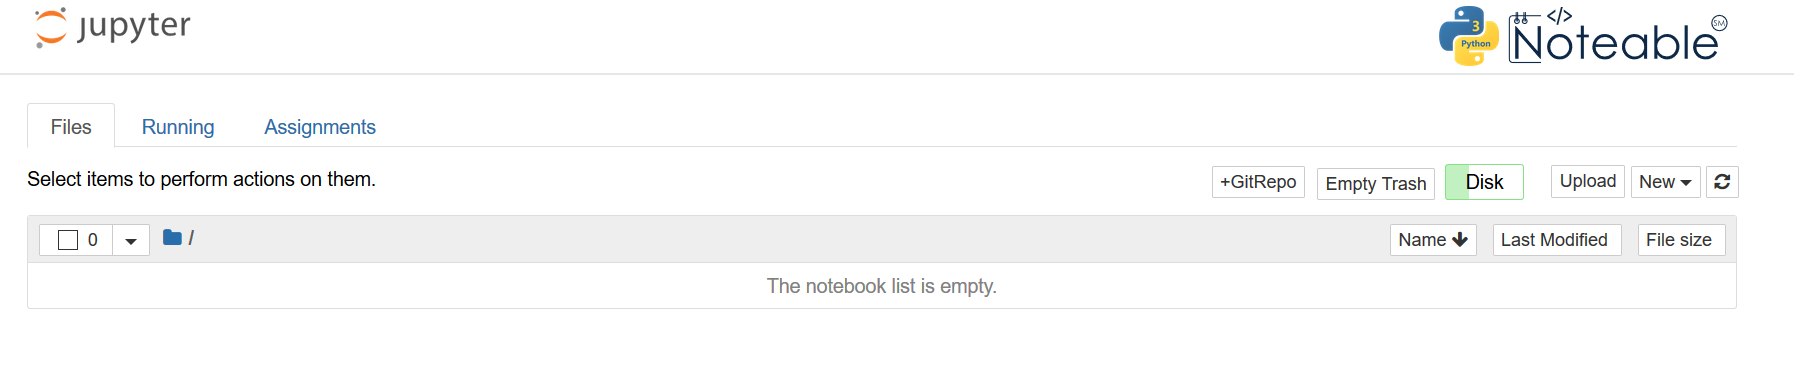 Screenshot of Noteable's launch page after starting up a notebook server